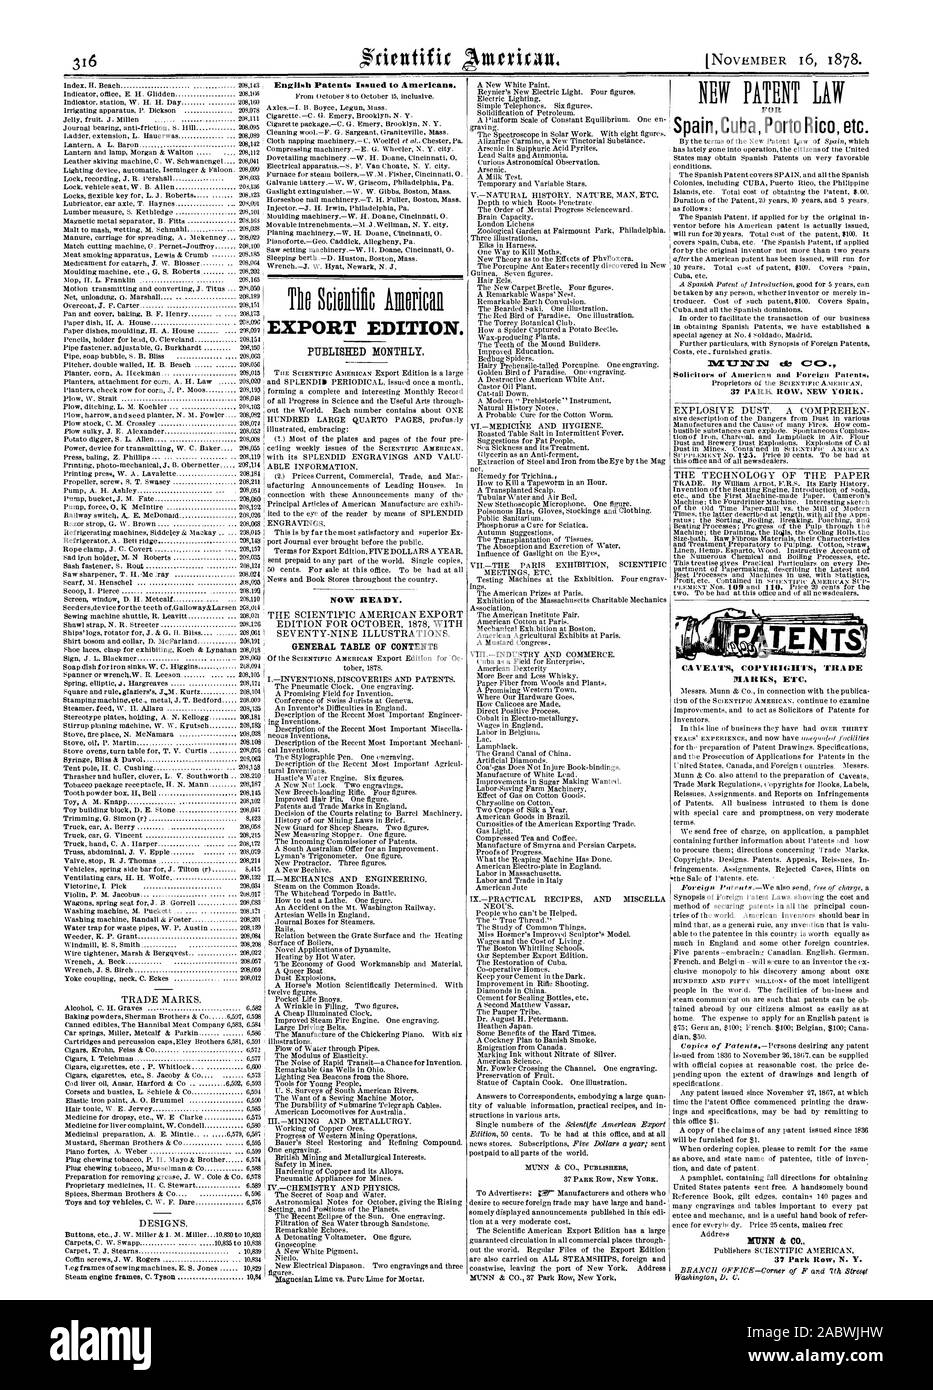 English Patents Issued to Americans. EXPORT EDITION. PUBLISHED MONTHLY. NOW READY. GENERAL TABLE OF CONTENTS FOR SpainCuba Porto Ric etc. CA 'FEATS COPYRIGHTS TRADE l!IAItKS ETC. 37 Park Row N. Y., scientific american, 1878-11-16 Stock Photo